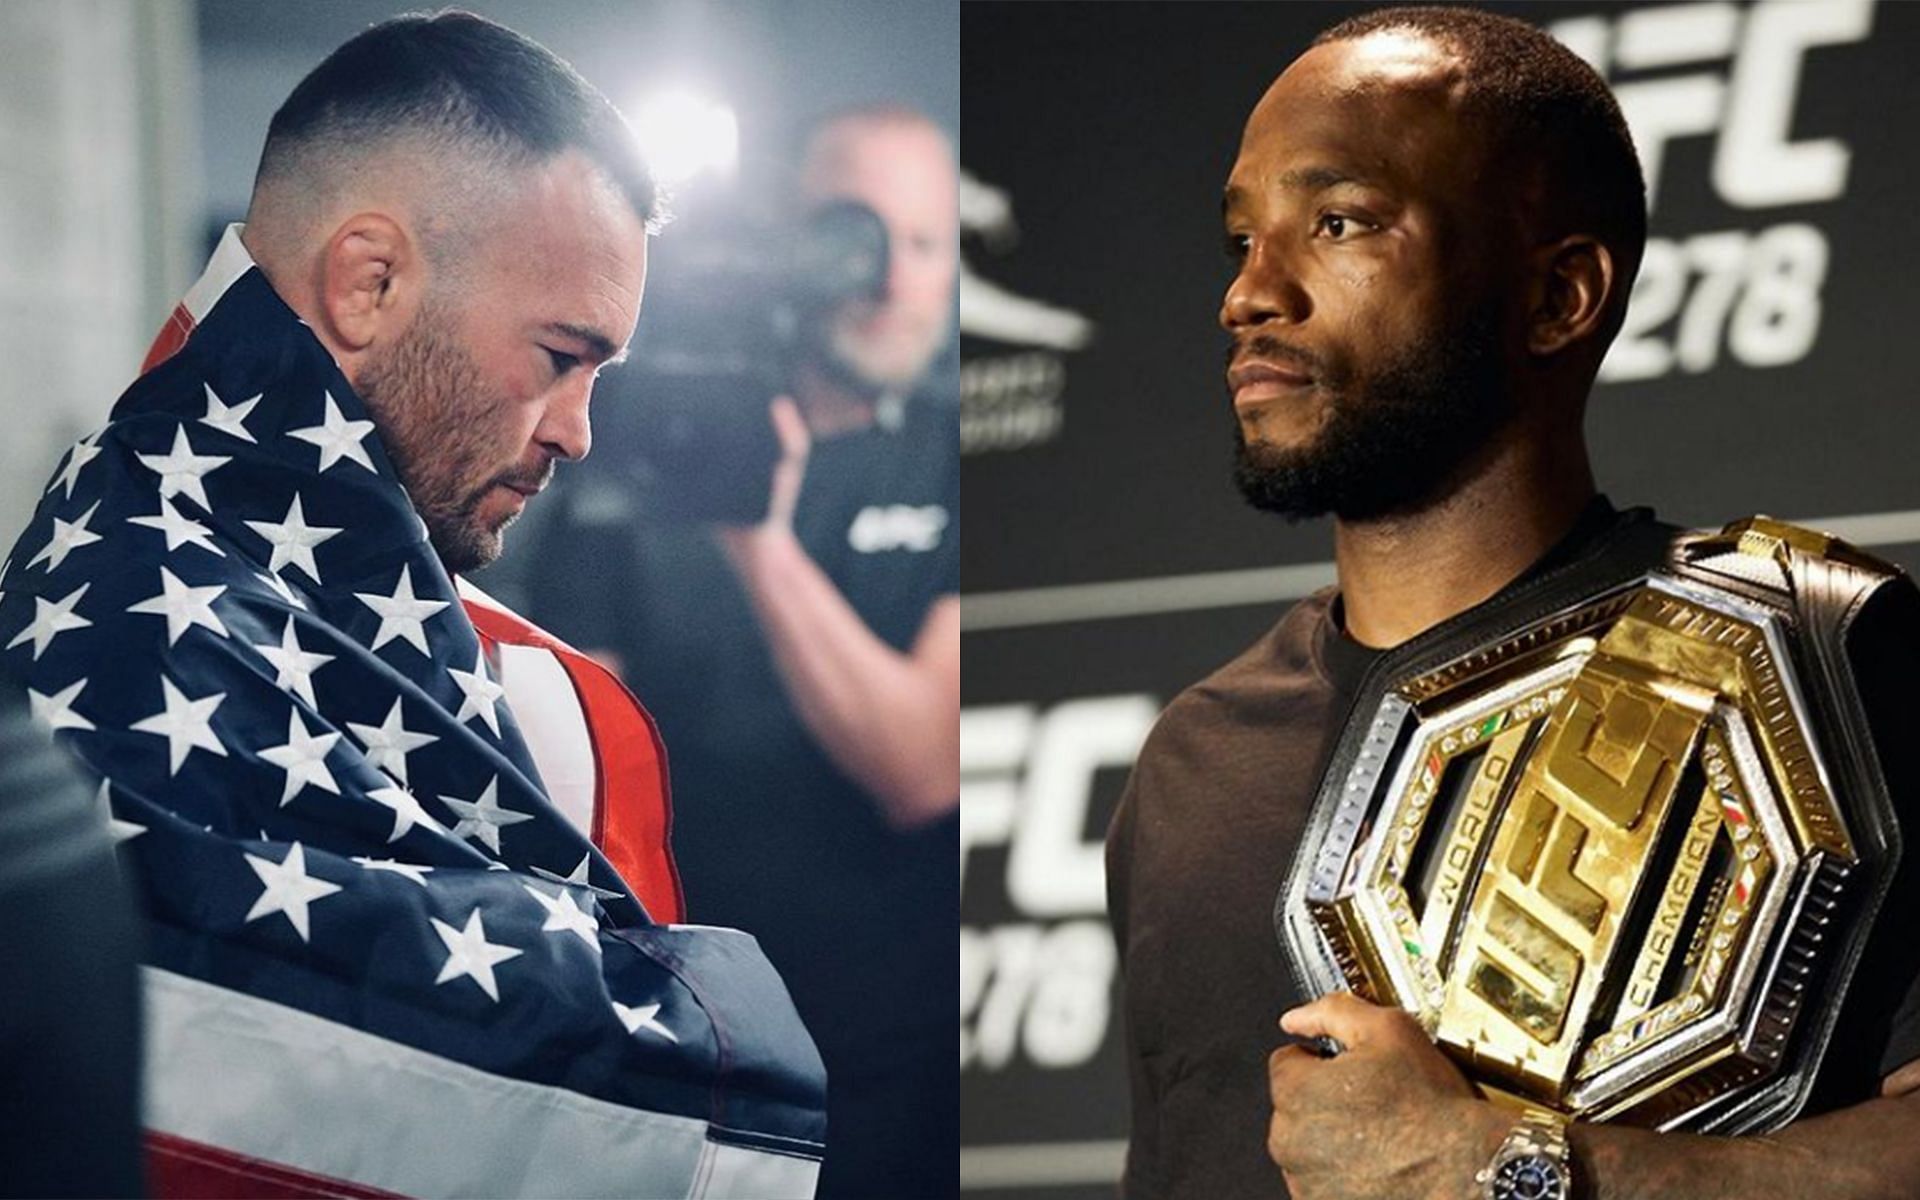 Colby Covington (left) and Leon Edwards (right) (Images Courtesy: @colbycovmma and @leonedwards